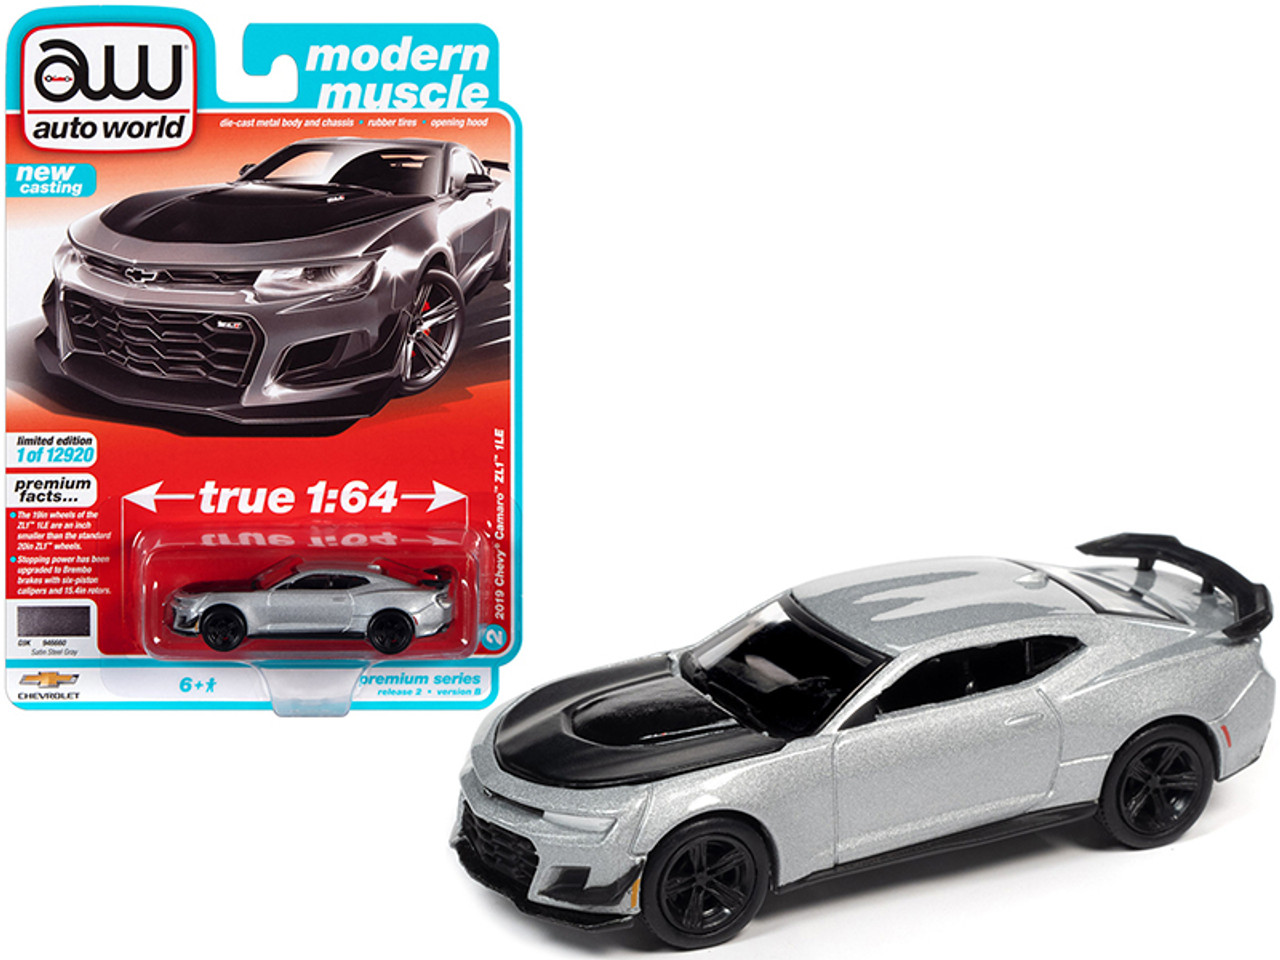 2019 Chevrolet Camaro ZL1 1LE Satin Steel Gray Metallic with Black Hood "Modern Muscle" Limited Edition to 12920 pieces Worldwide 1/64 Diecast Model Car by Autoworld